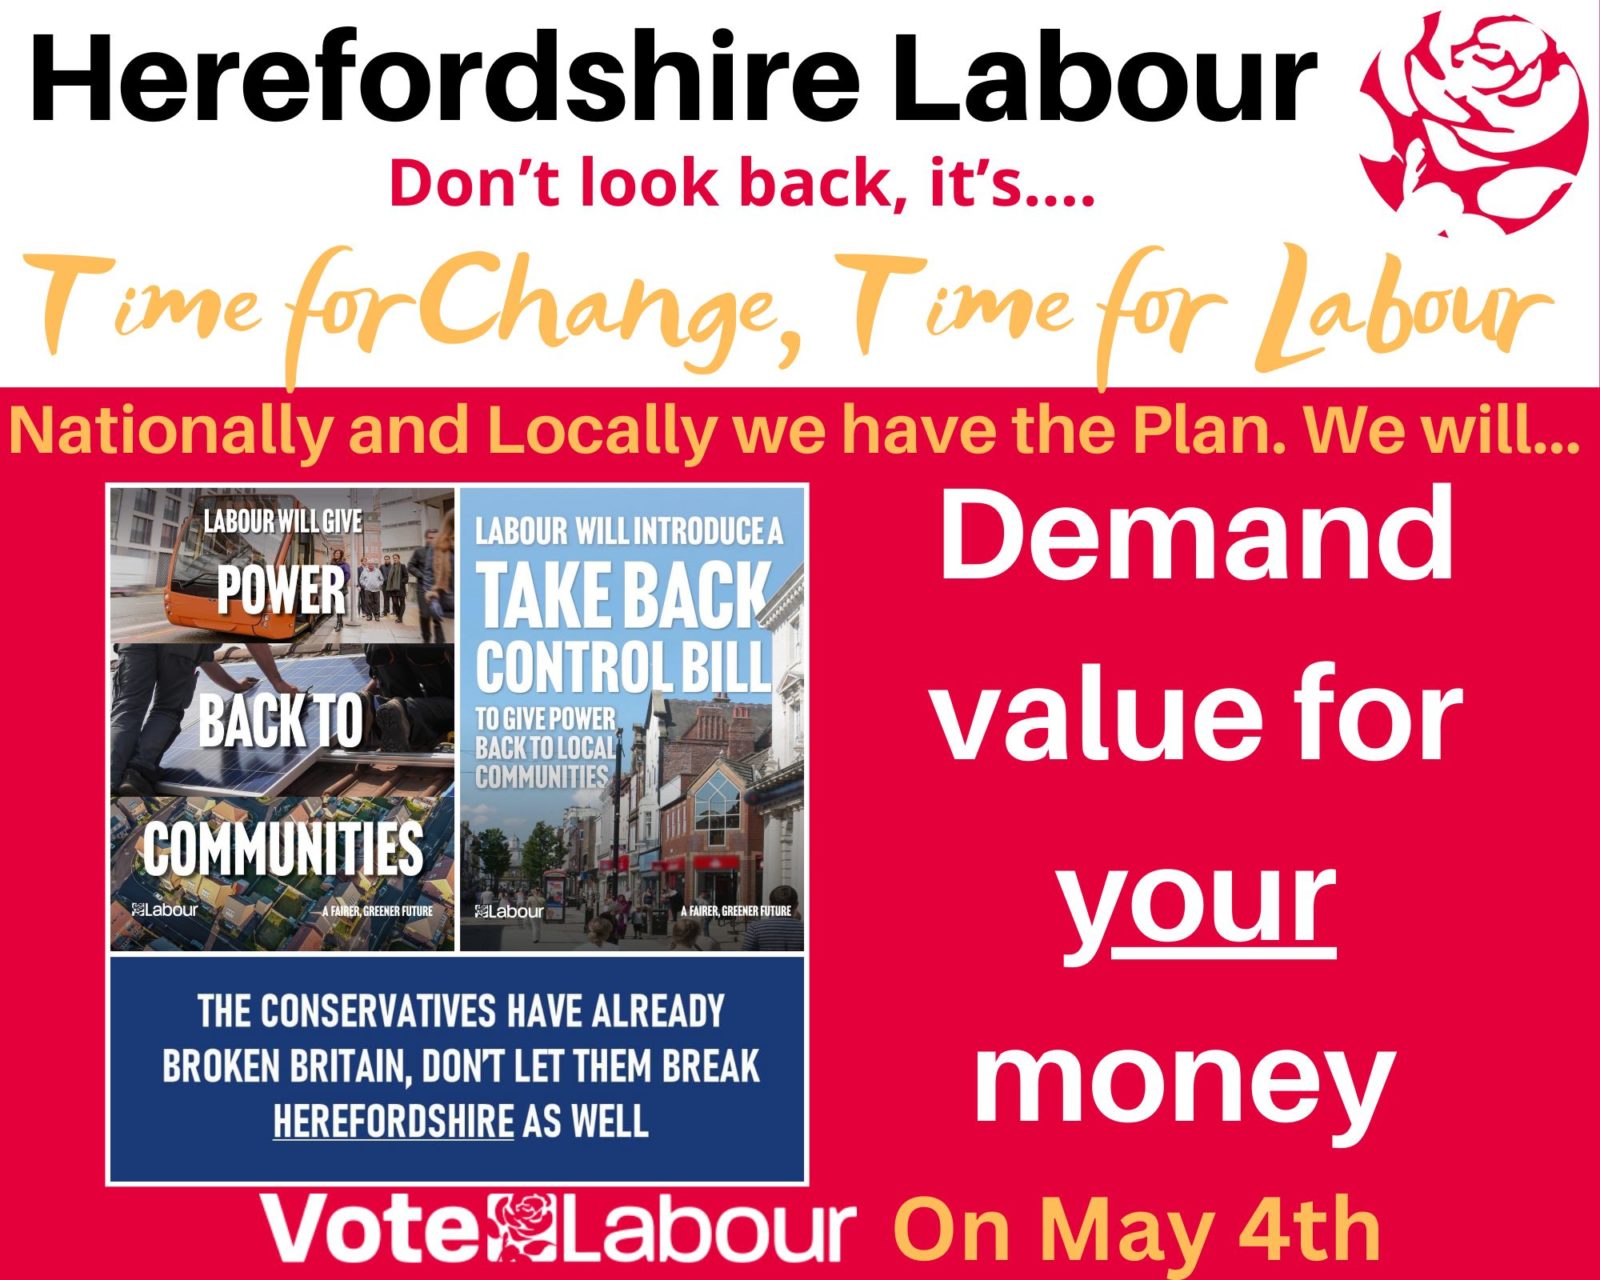 Herefordshire Labour Policy #1 Value for your money